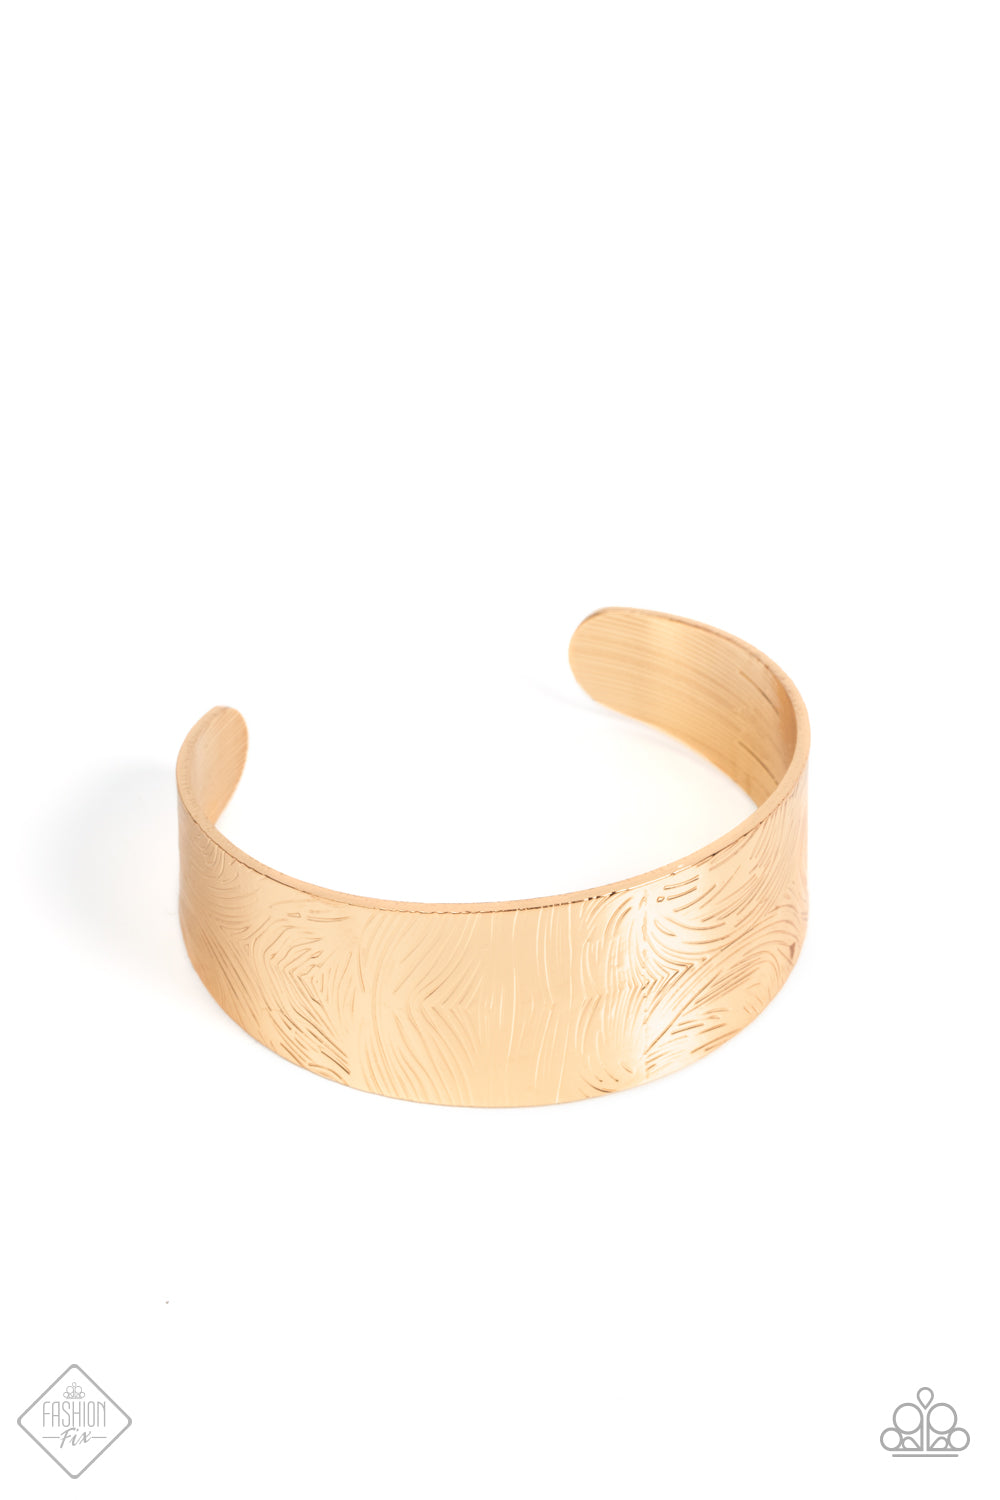 Coolly Curved - Gold | September Fashion Fix | Gold Band | Cuff | Sunset Sightings